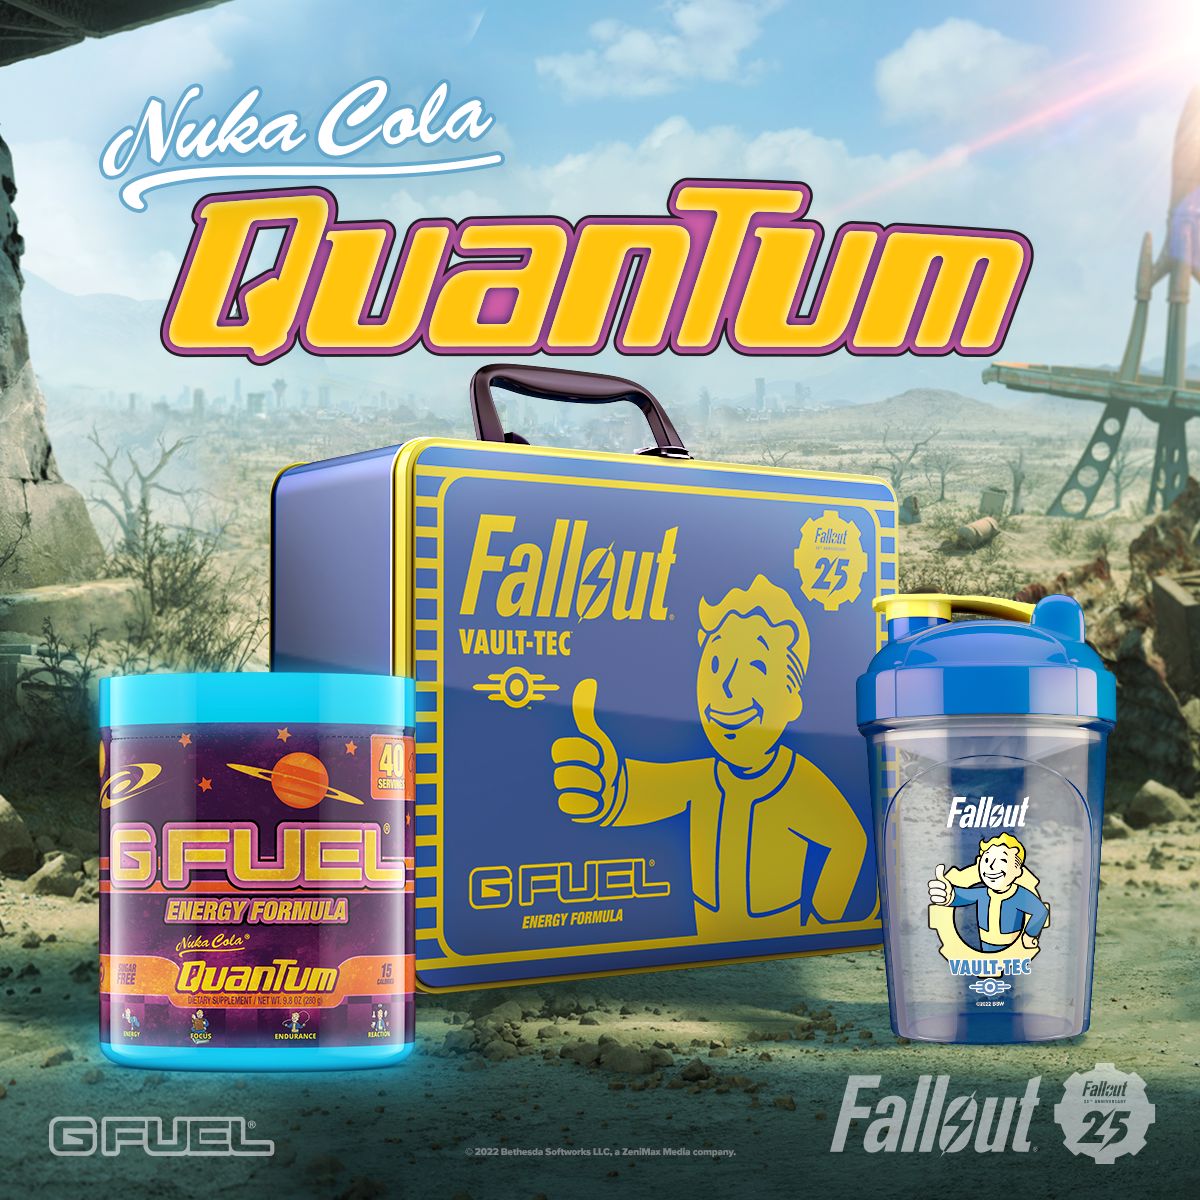 G FUEL Celebrates 25 Years of “Fallout” with New Flavor, G FUEL Nuka Cola® Quantum!